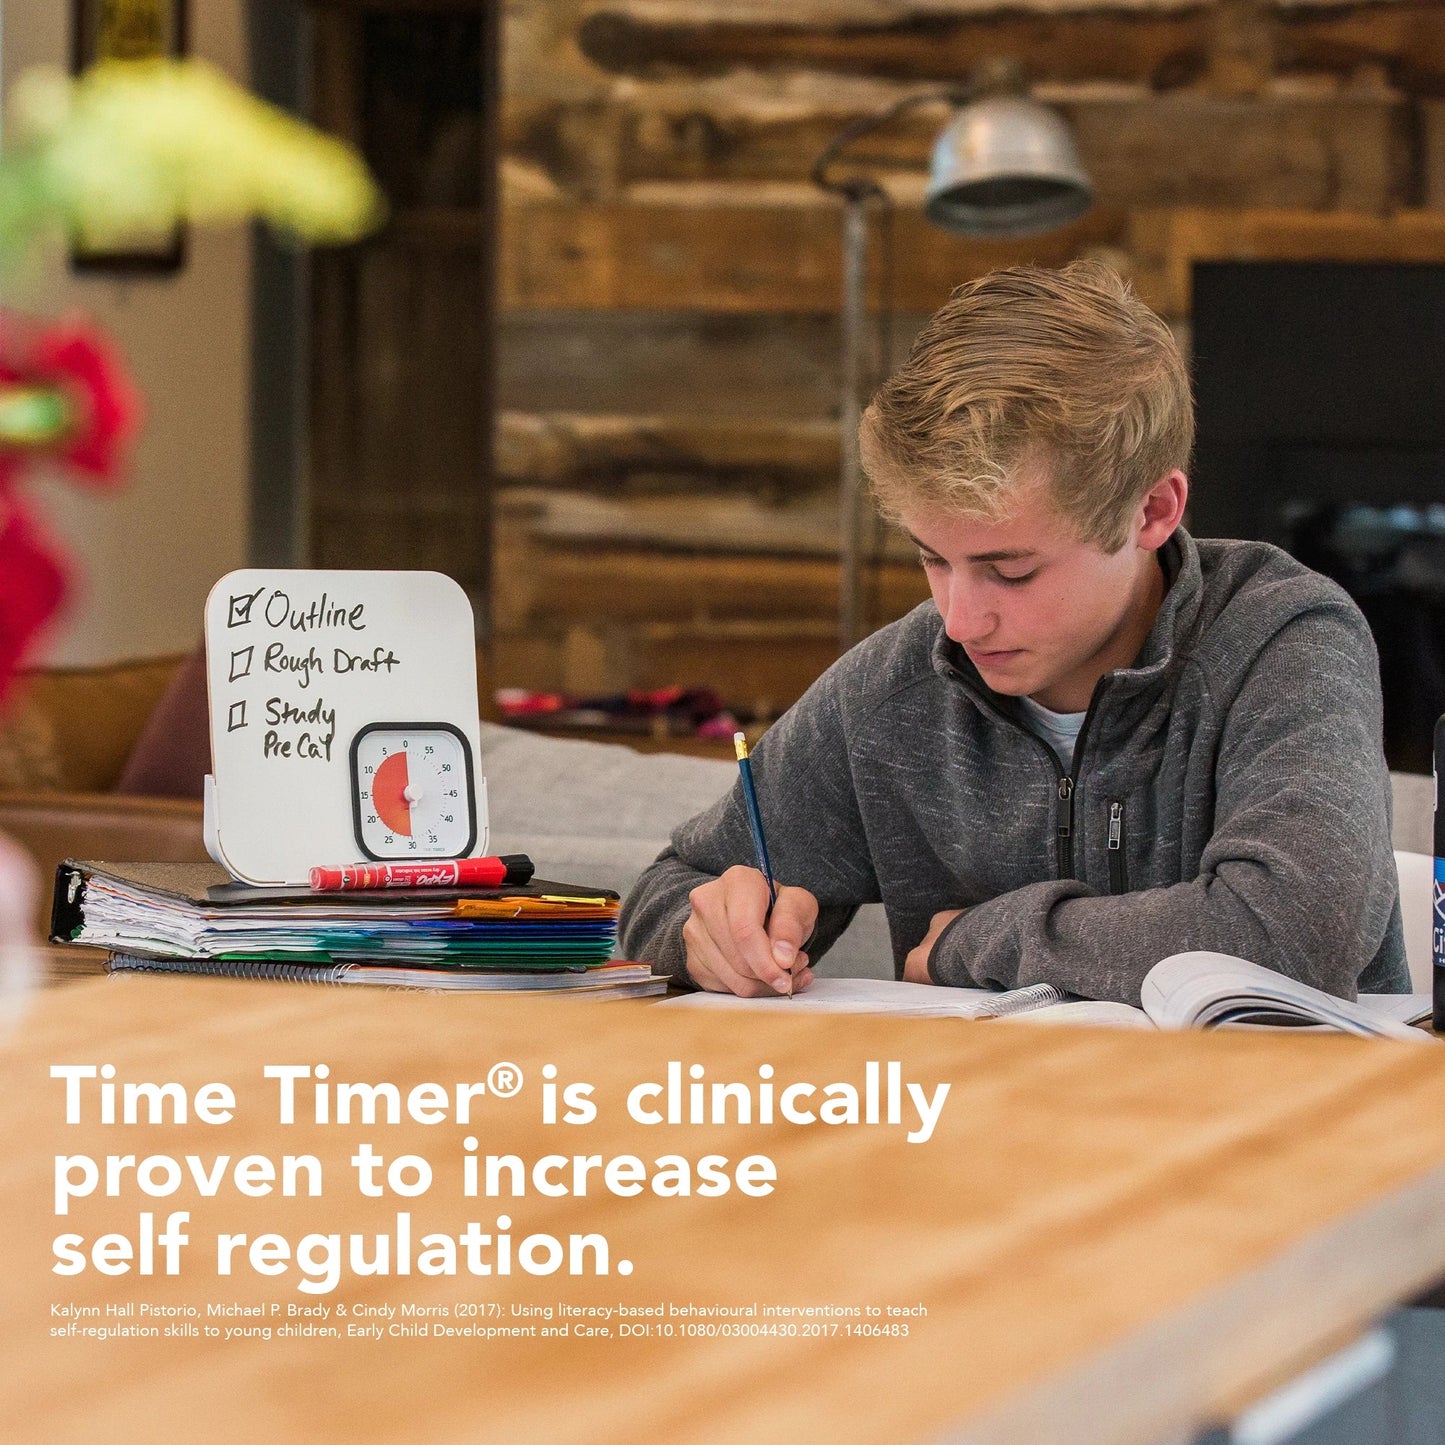 Time_Timer_Edication_edition_mod_with_dry_erase_board_being_used_by_boy_studying_timer_set_to_30_minutes